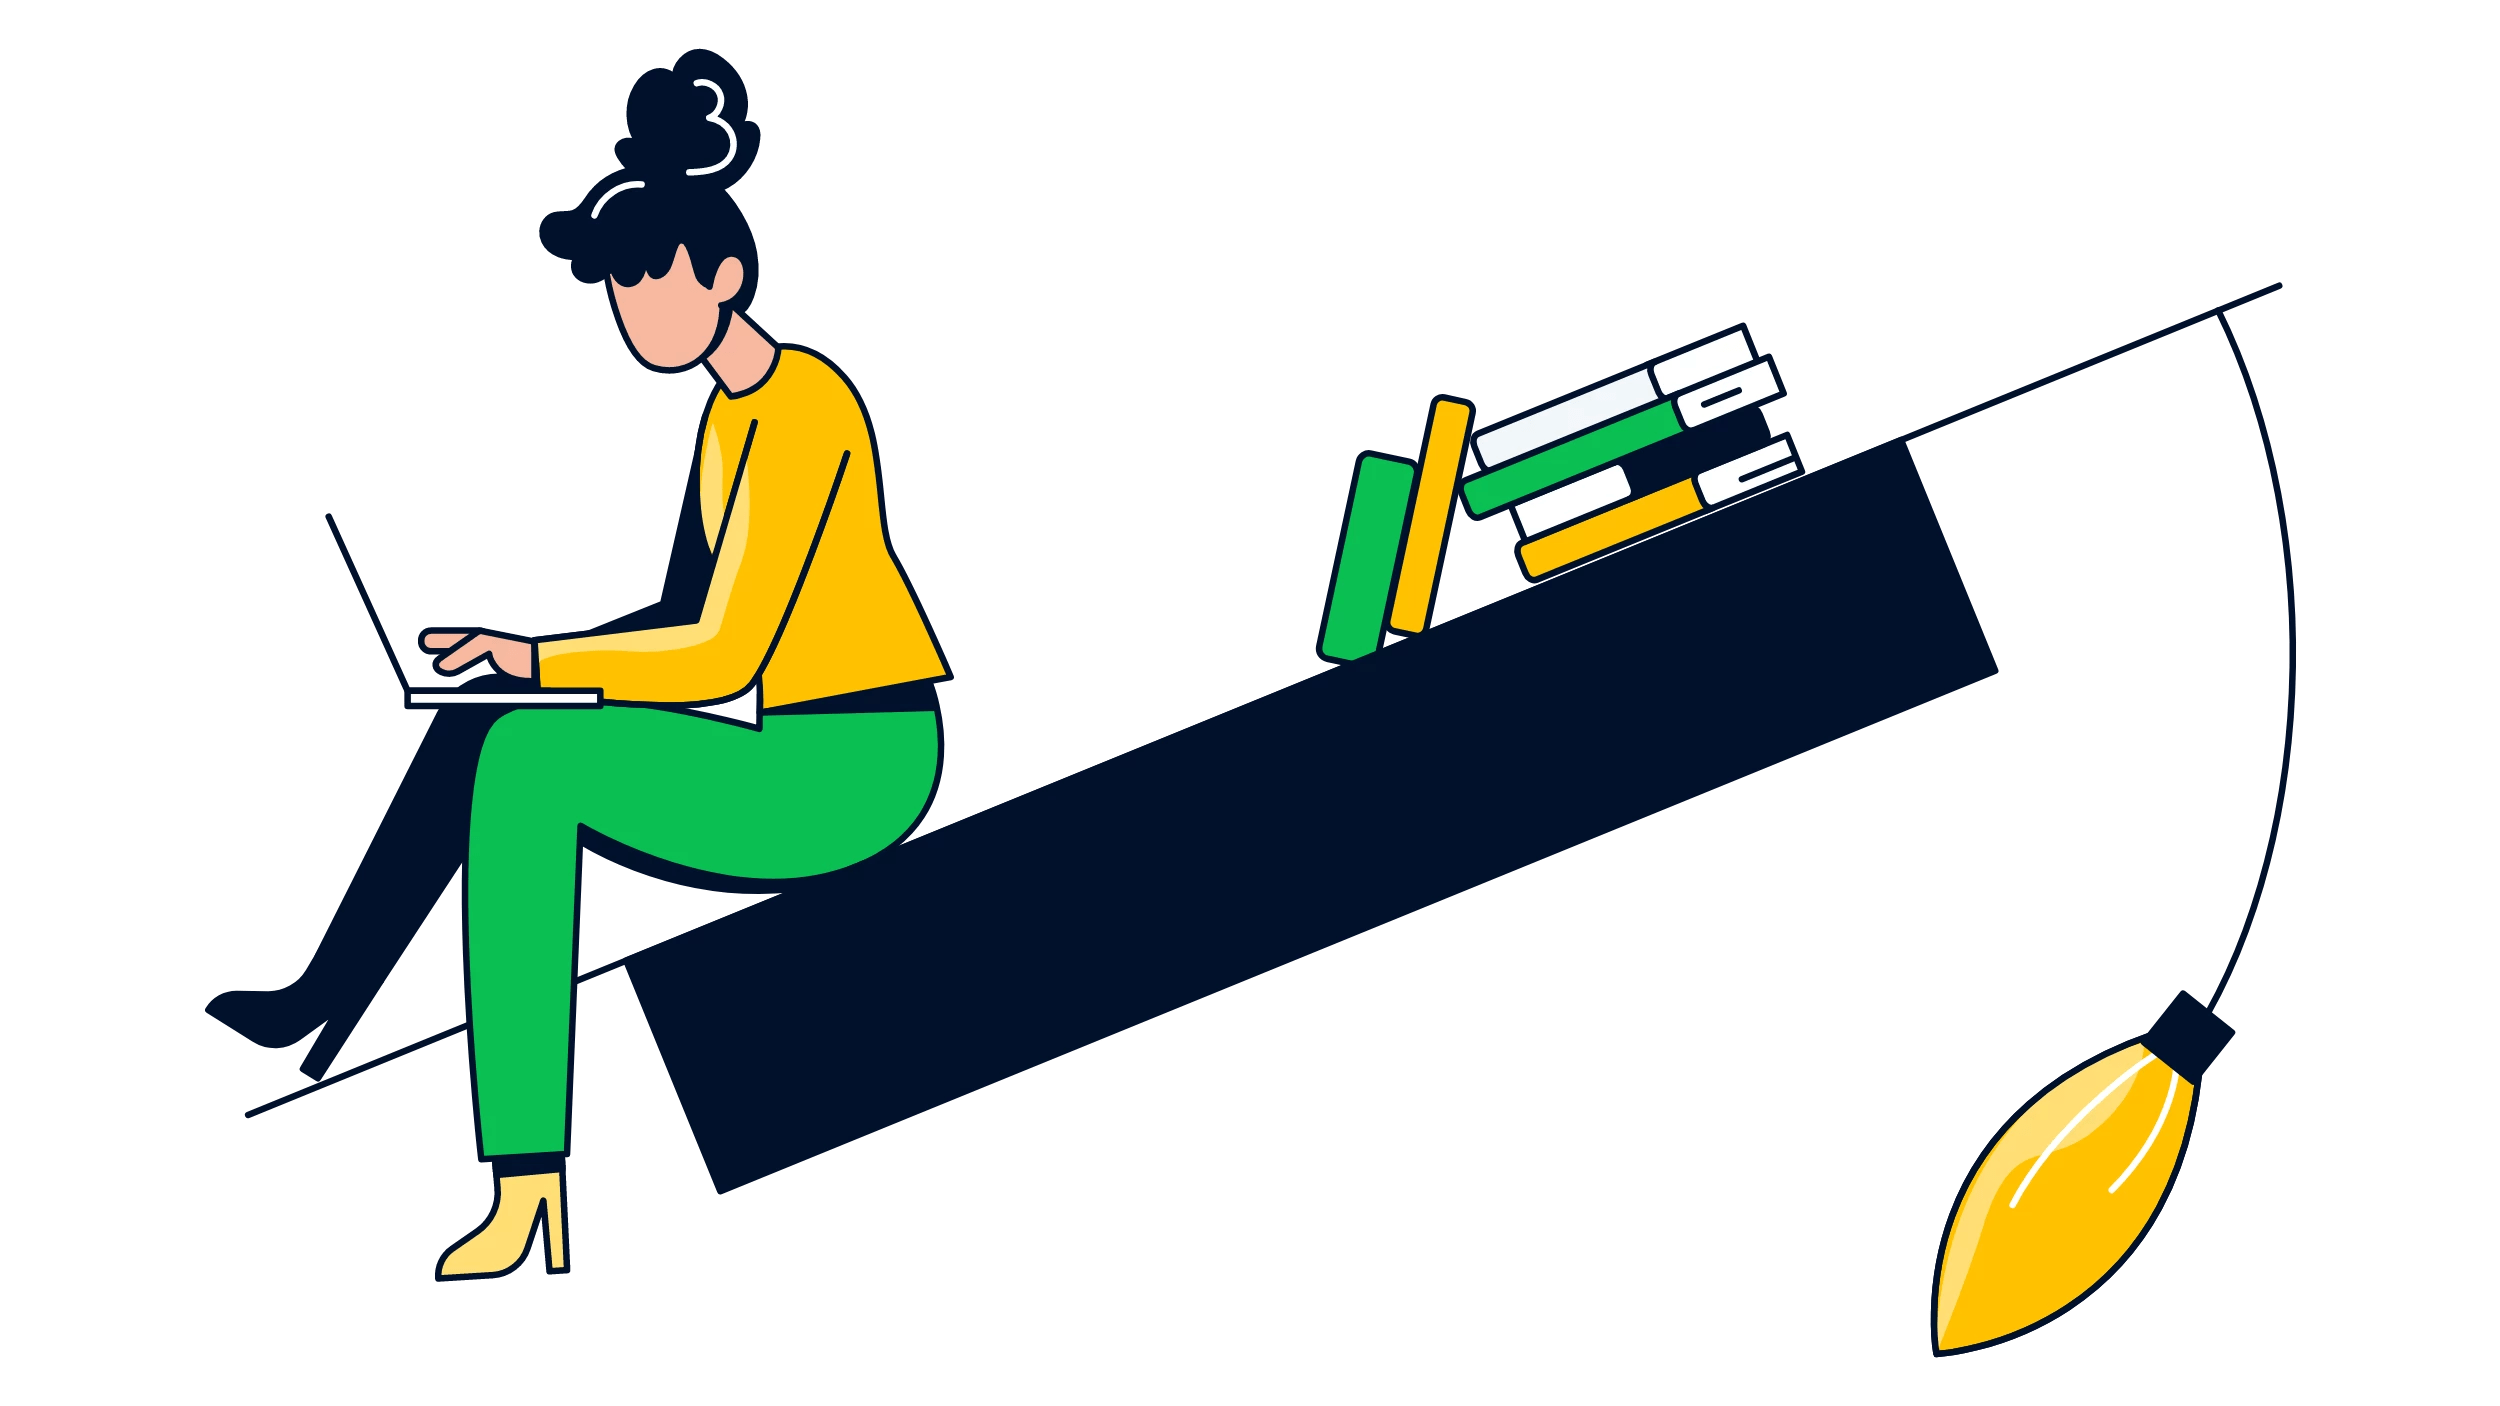 A girl on top of a big book or bookshelf full with books in the colors of green and yellow.